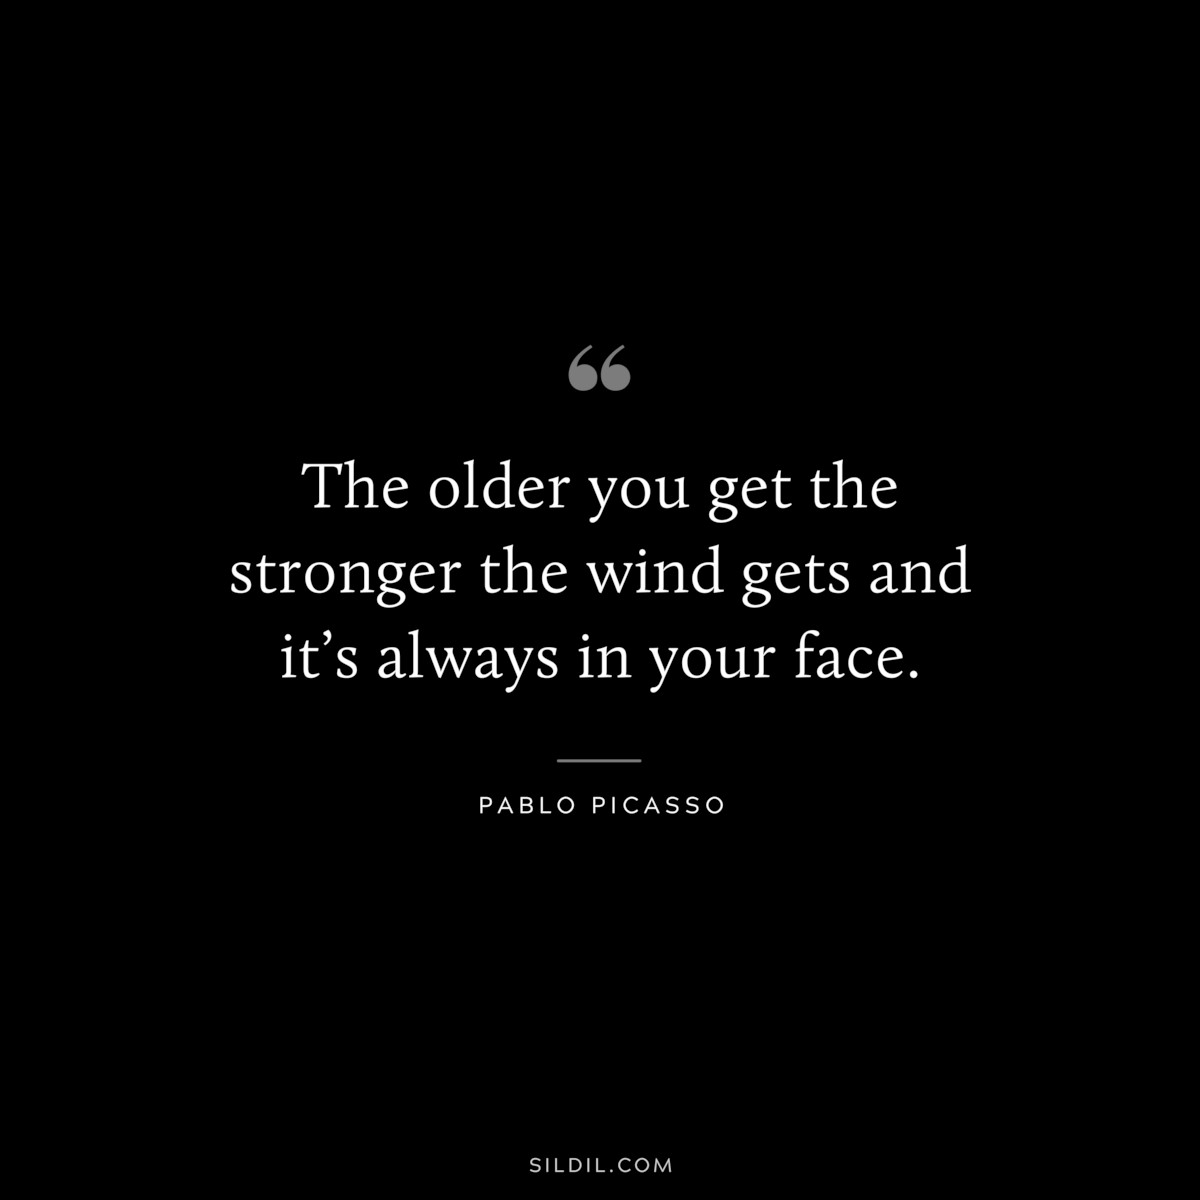 The older you get the stronger the wind gets and it’s always in your face. ― Pablo Picasso